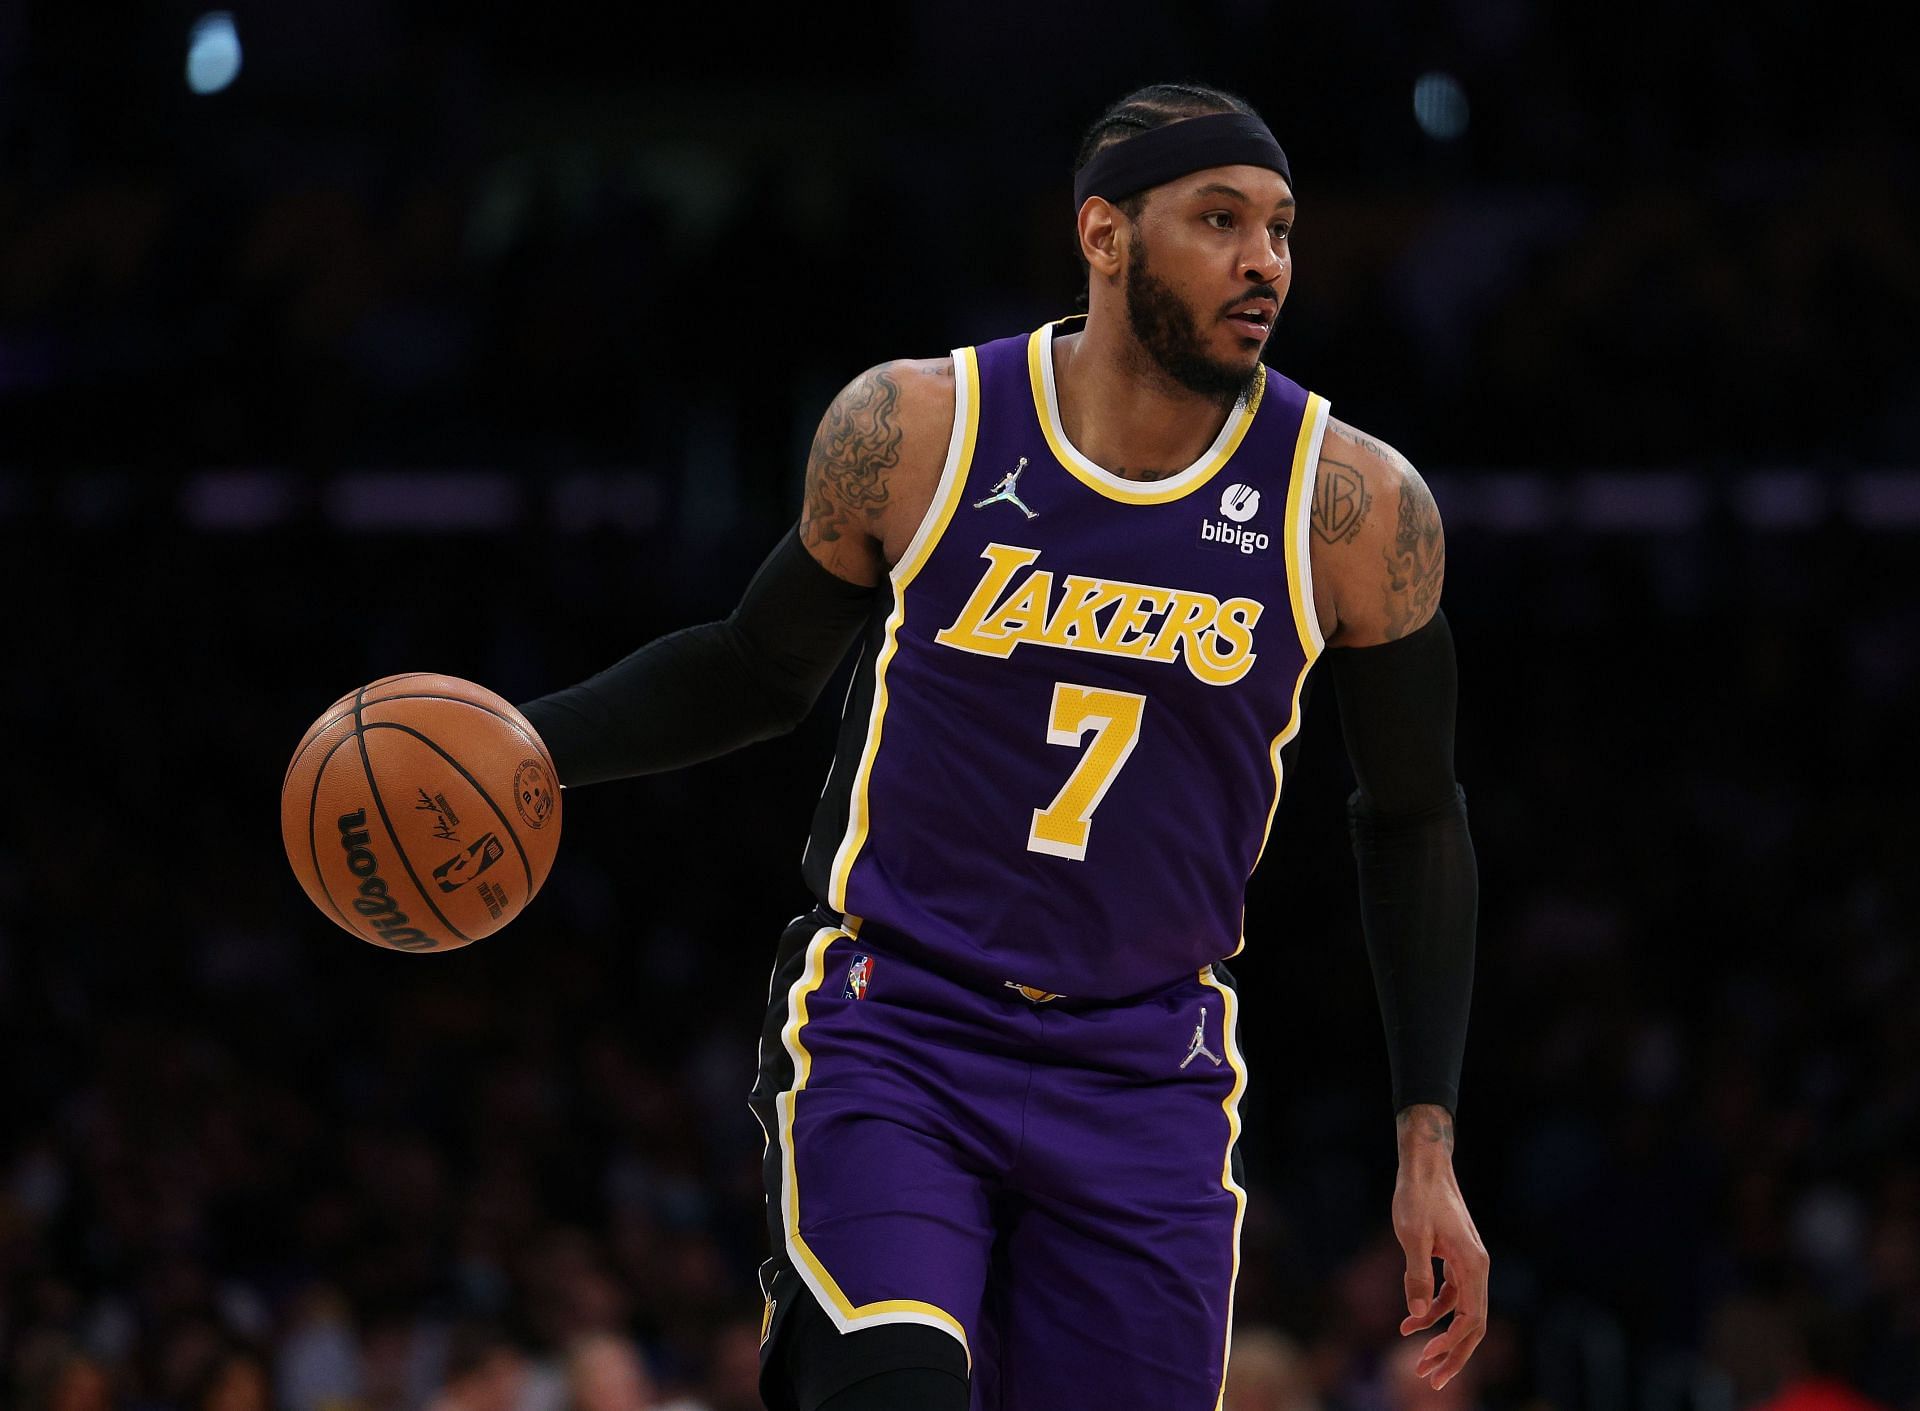 Reports: NBA veterans like DeMarcus Cousins and Carmelo Anthony